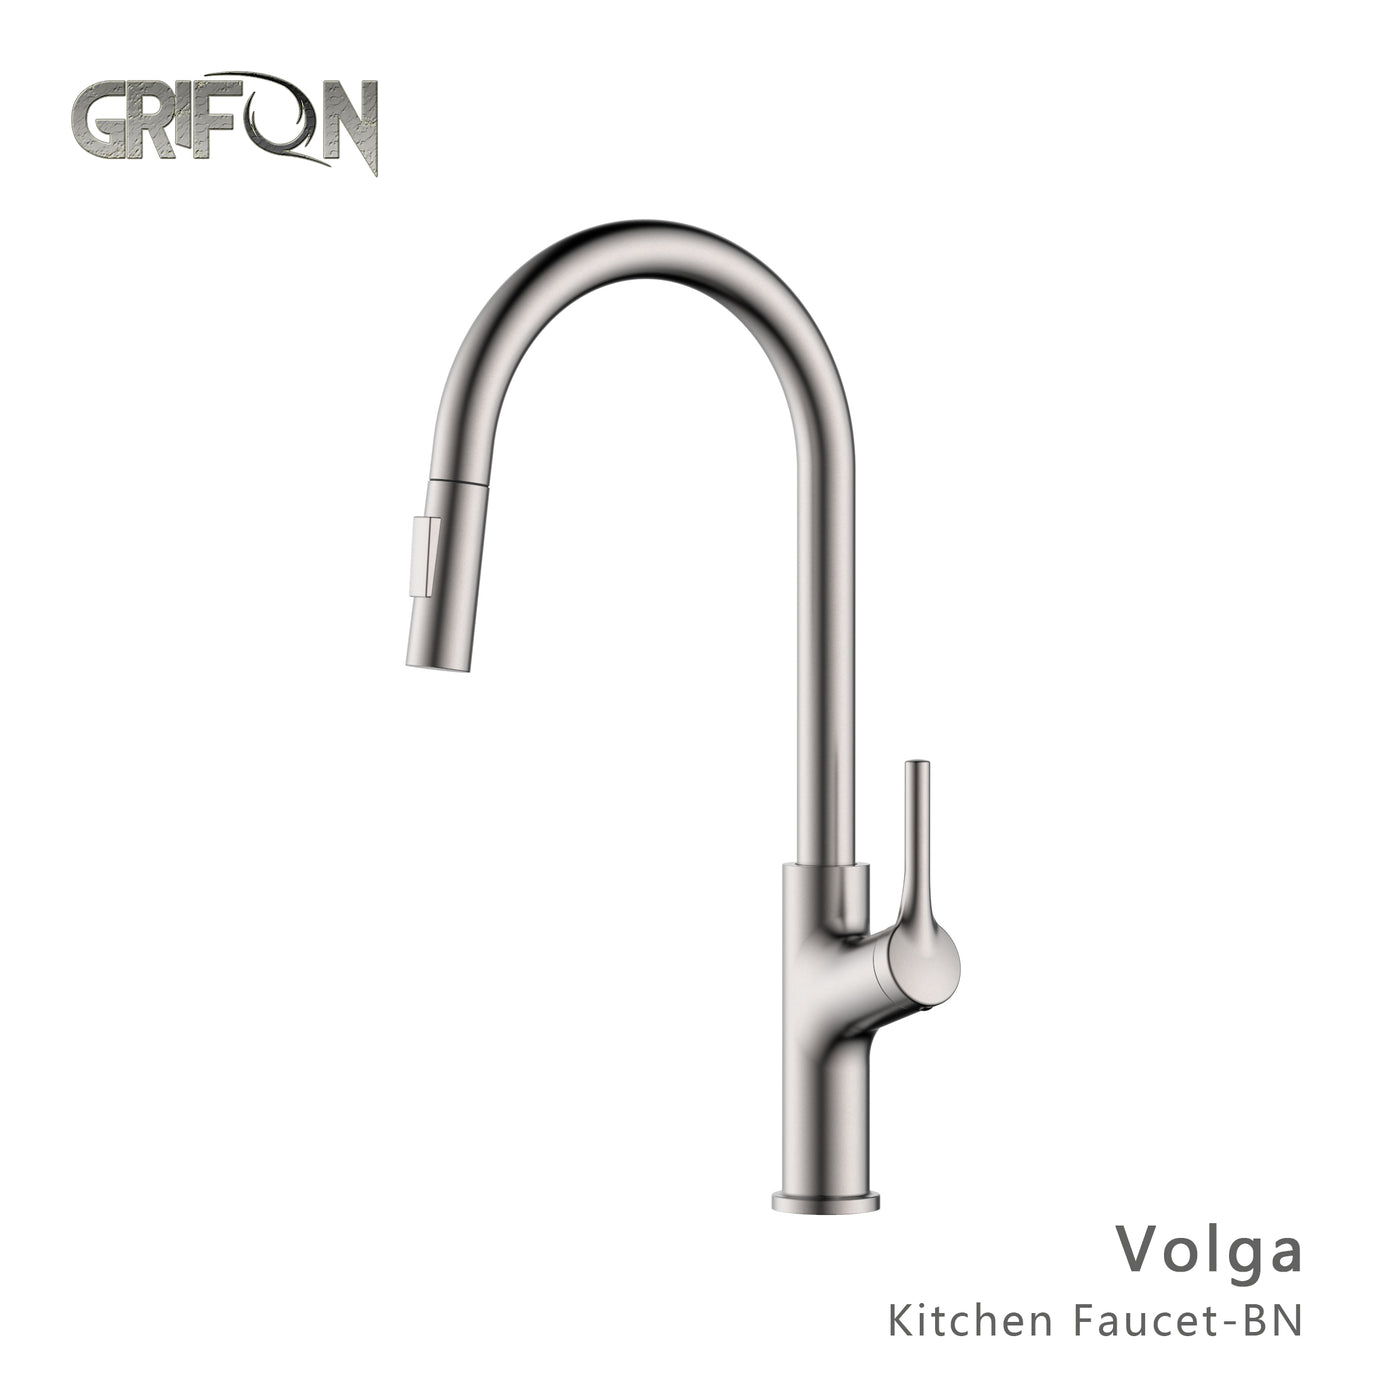 VOLGA™ GF401 Contemporary Style Single-Handle Kitchen Sink Faucet with Pull-Down Sprayer